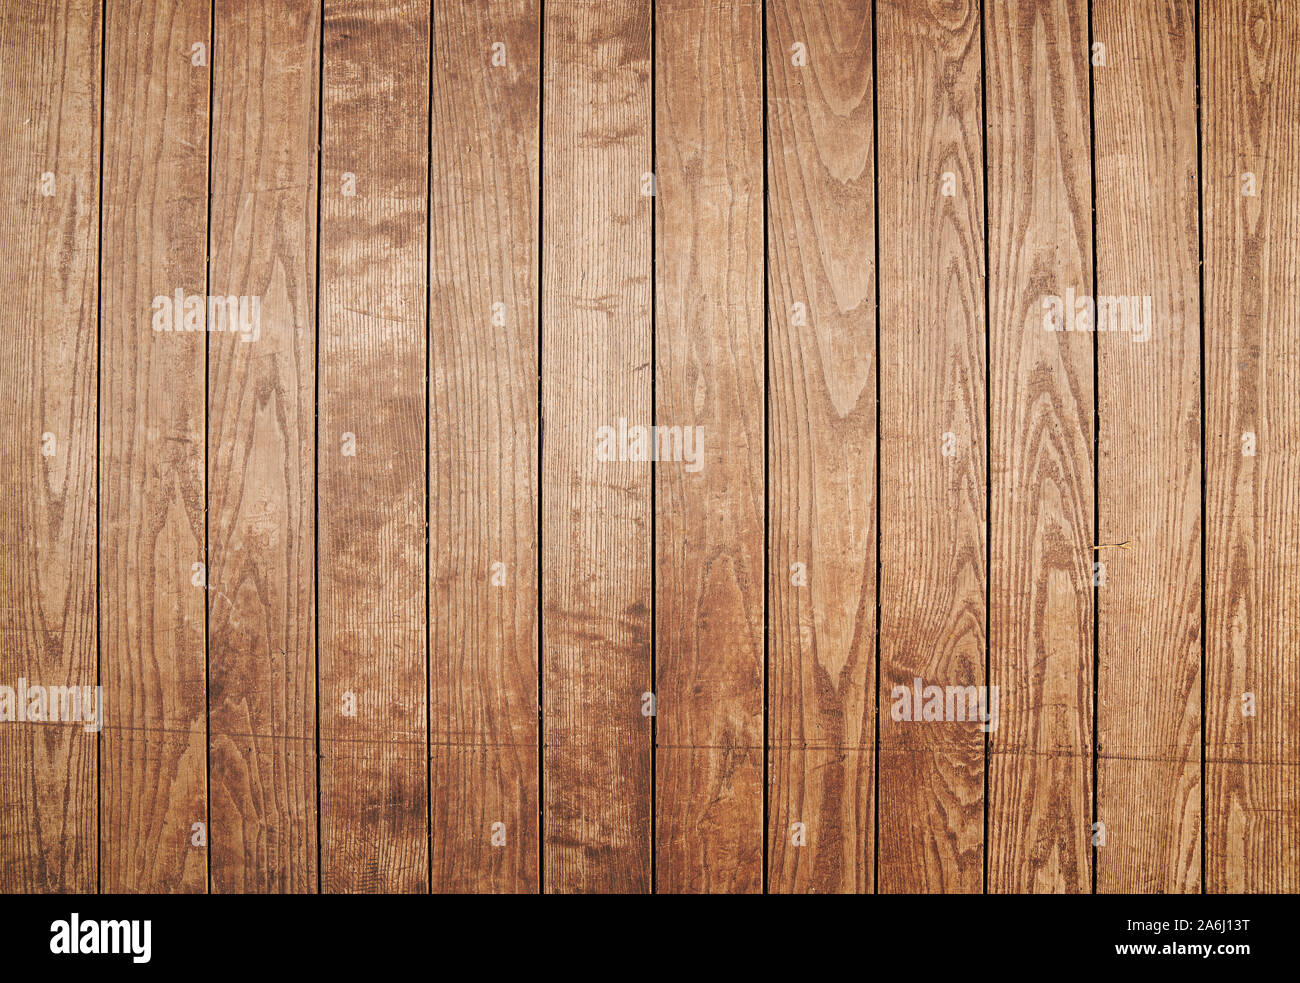 Brown painted natural wood with grains for background and texture. Stock Photo